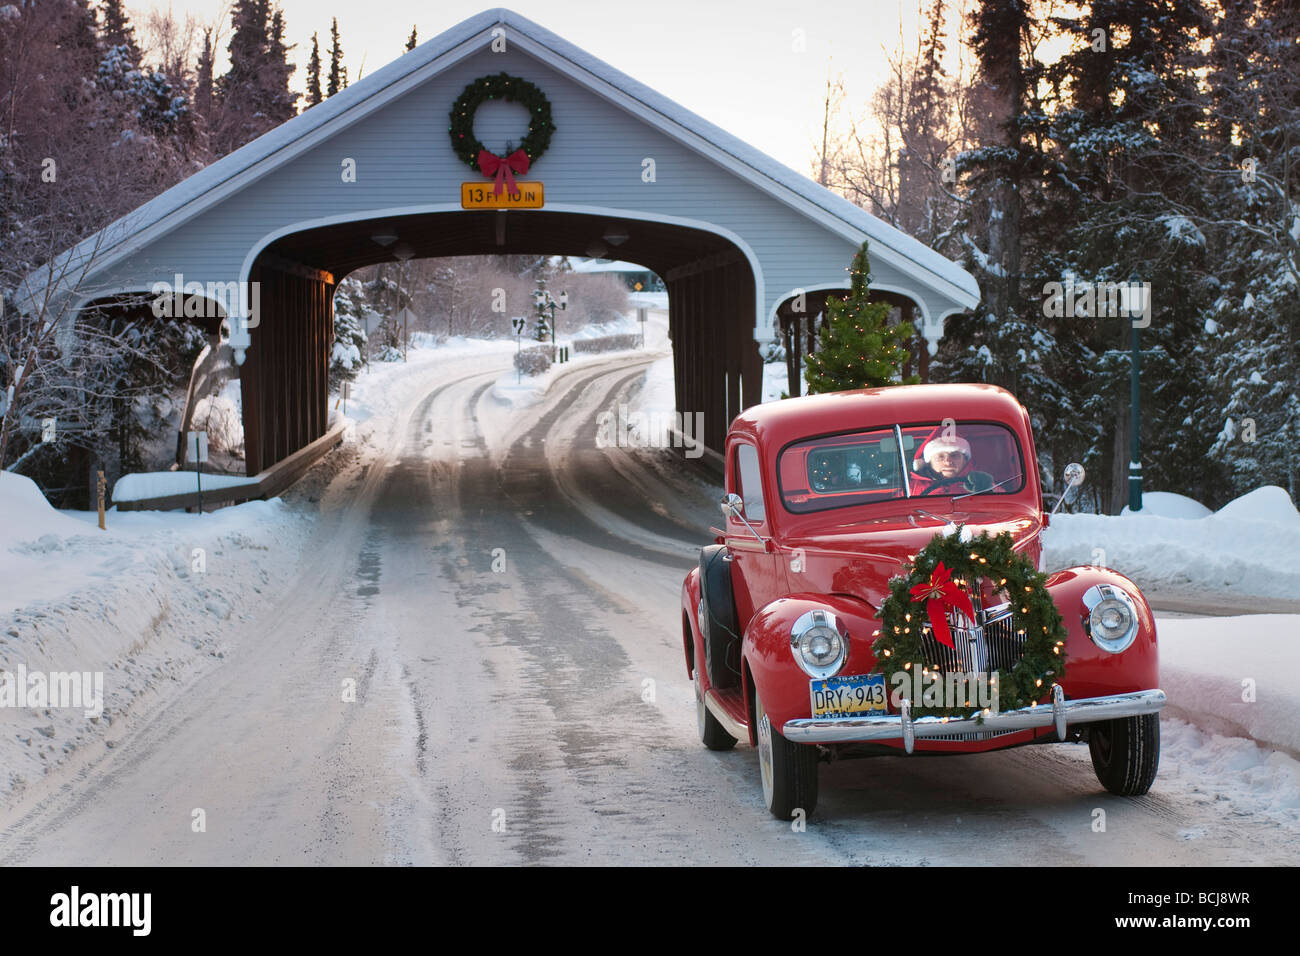 Man driving a vintage Ford pickup through a covered bridge with a Christmas wreath on the grill and a tree in the back, Alaska Stock Photo